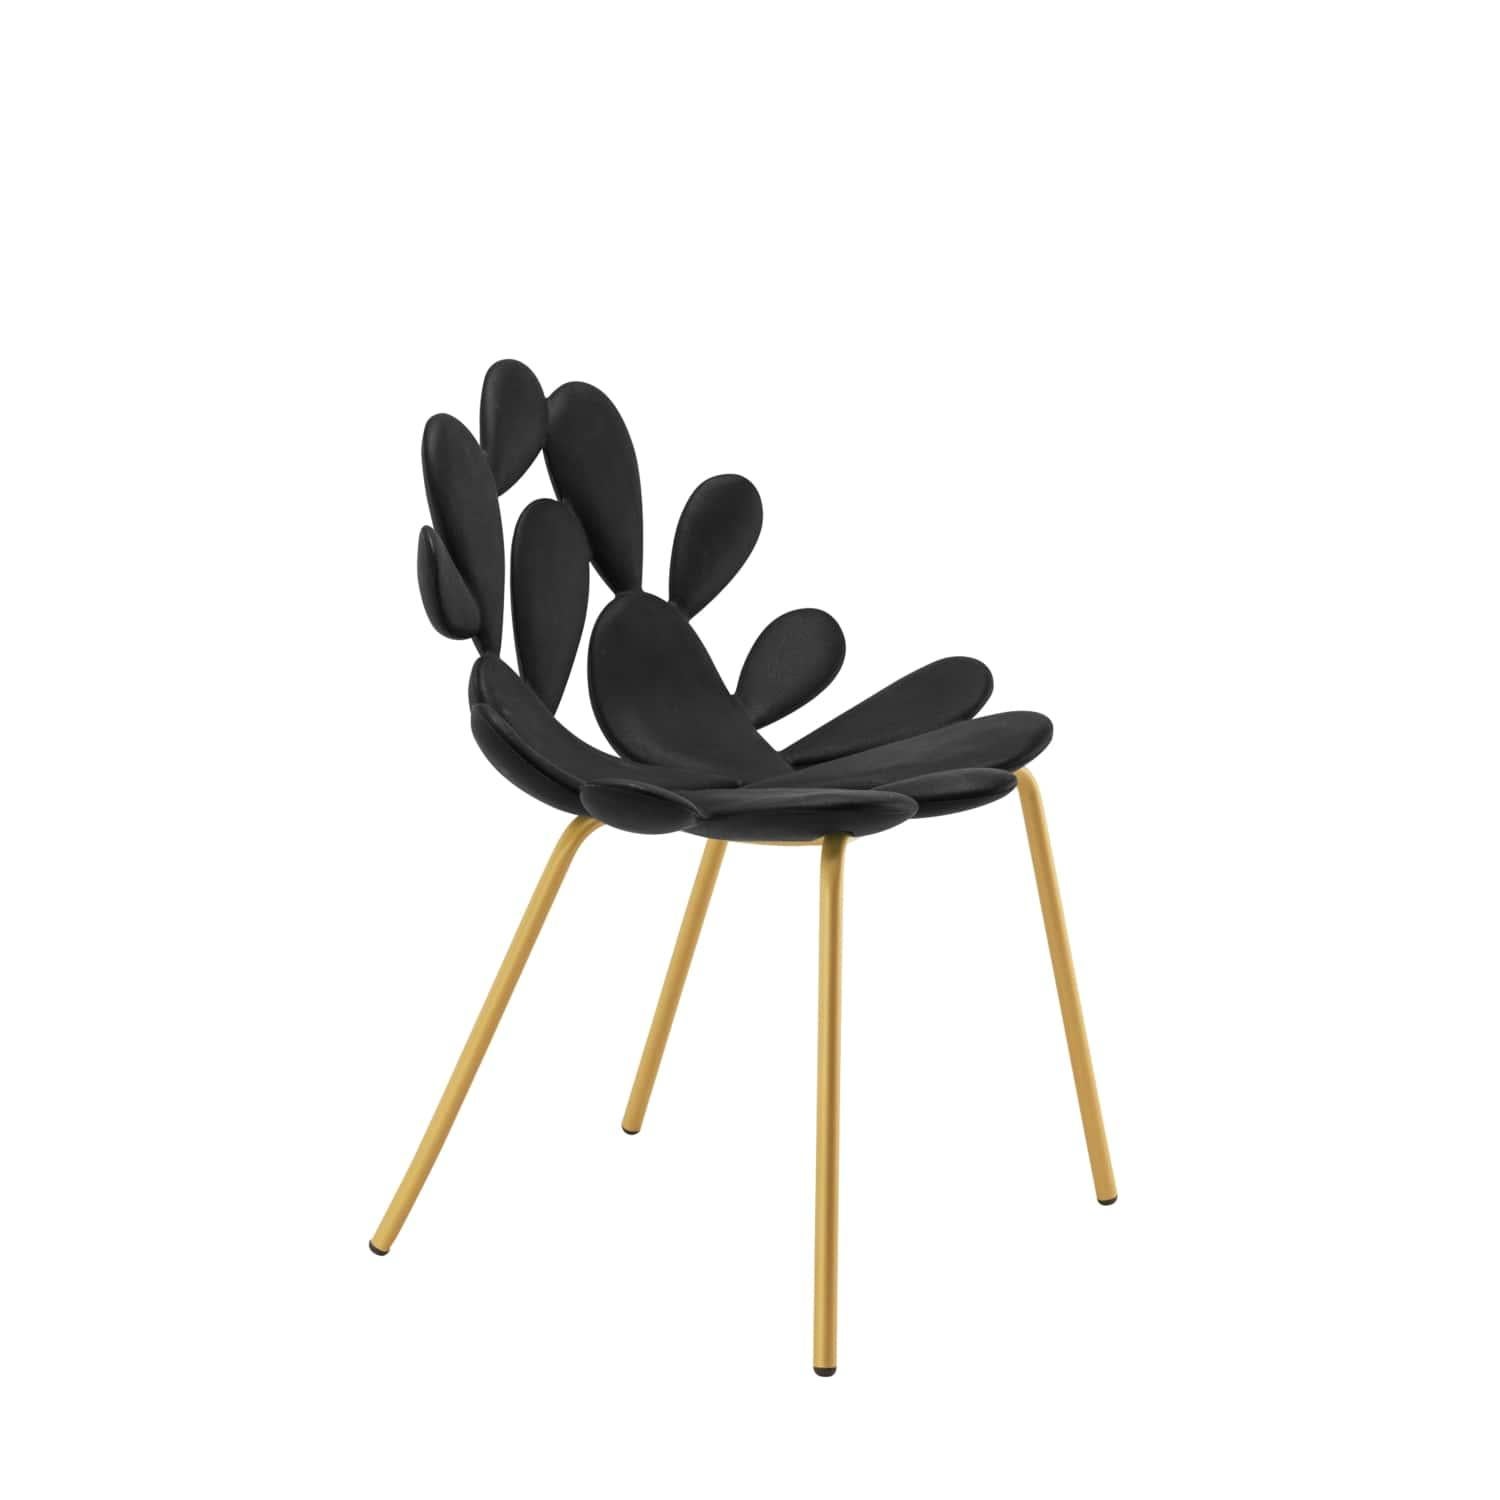 Modern Black / Brass Cactus Chair by Marcantonio Made in Italy